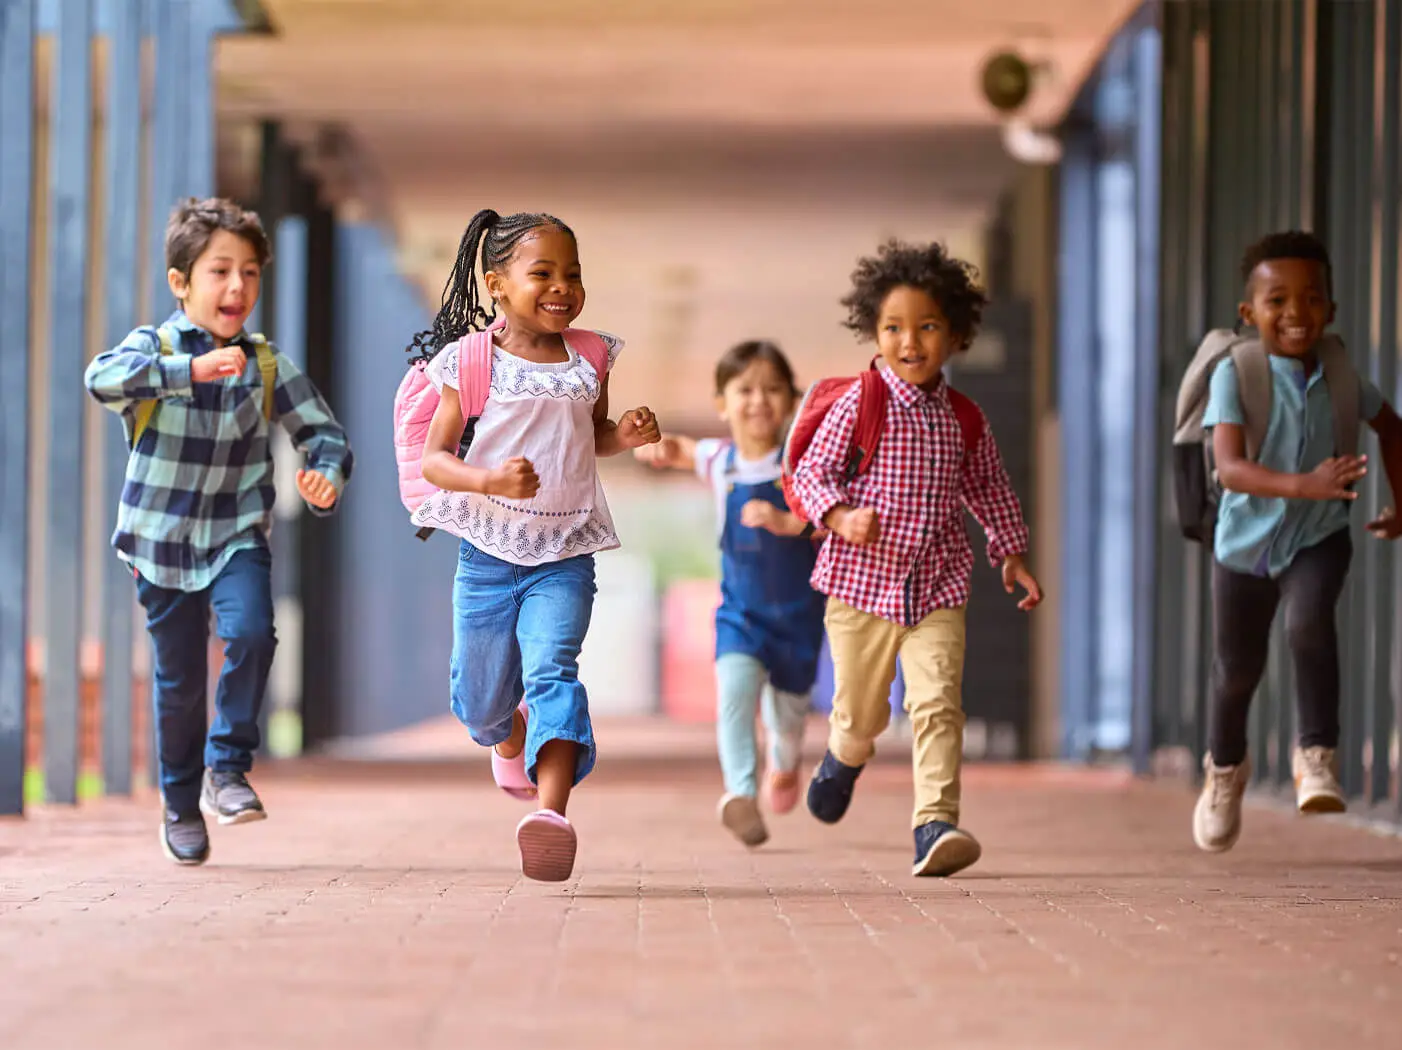 A group of young kids with backpacks running on a walkway.